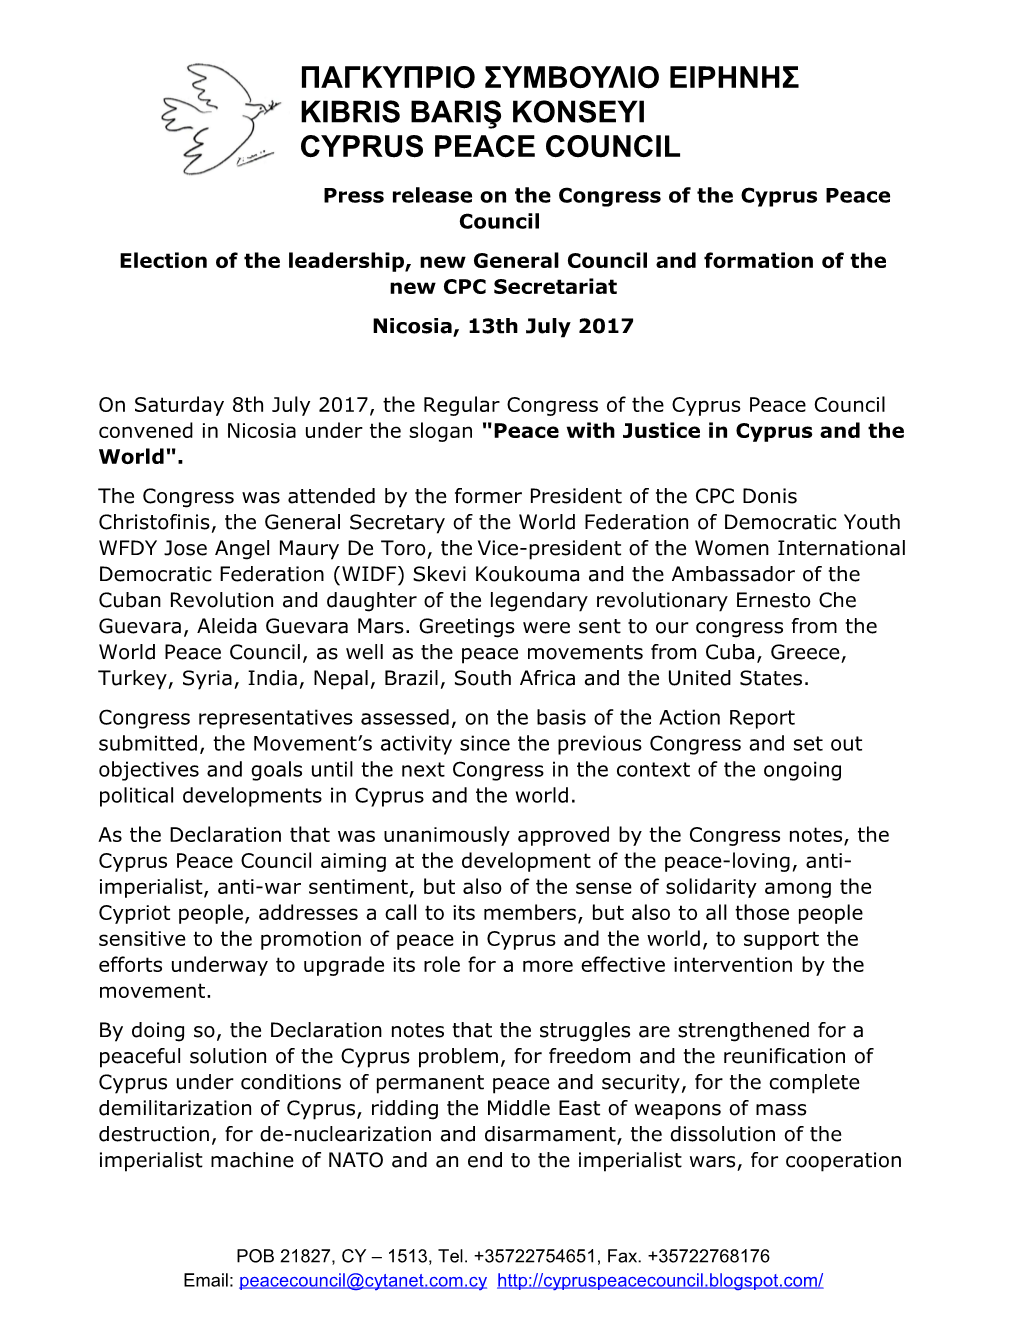 Press Release on the Congress of the Cyprus Peace Council